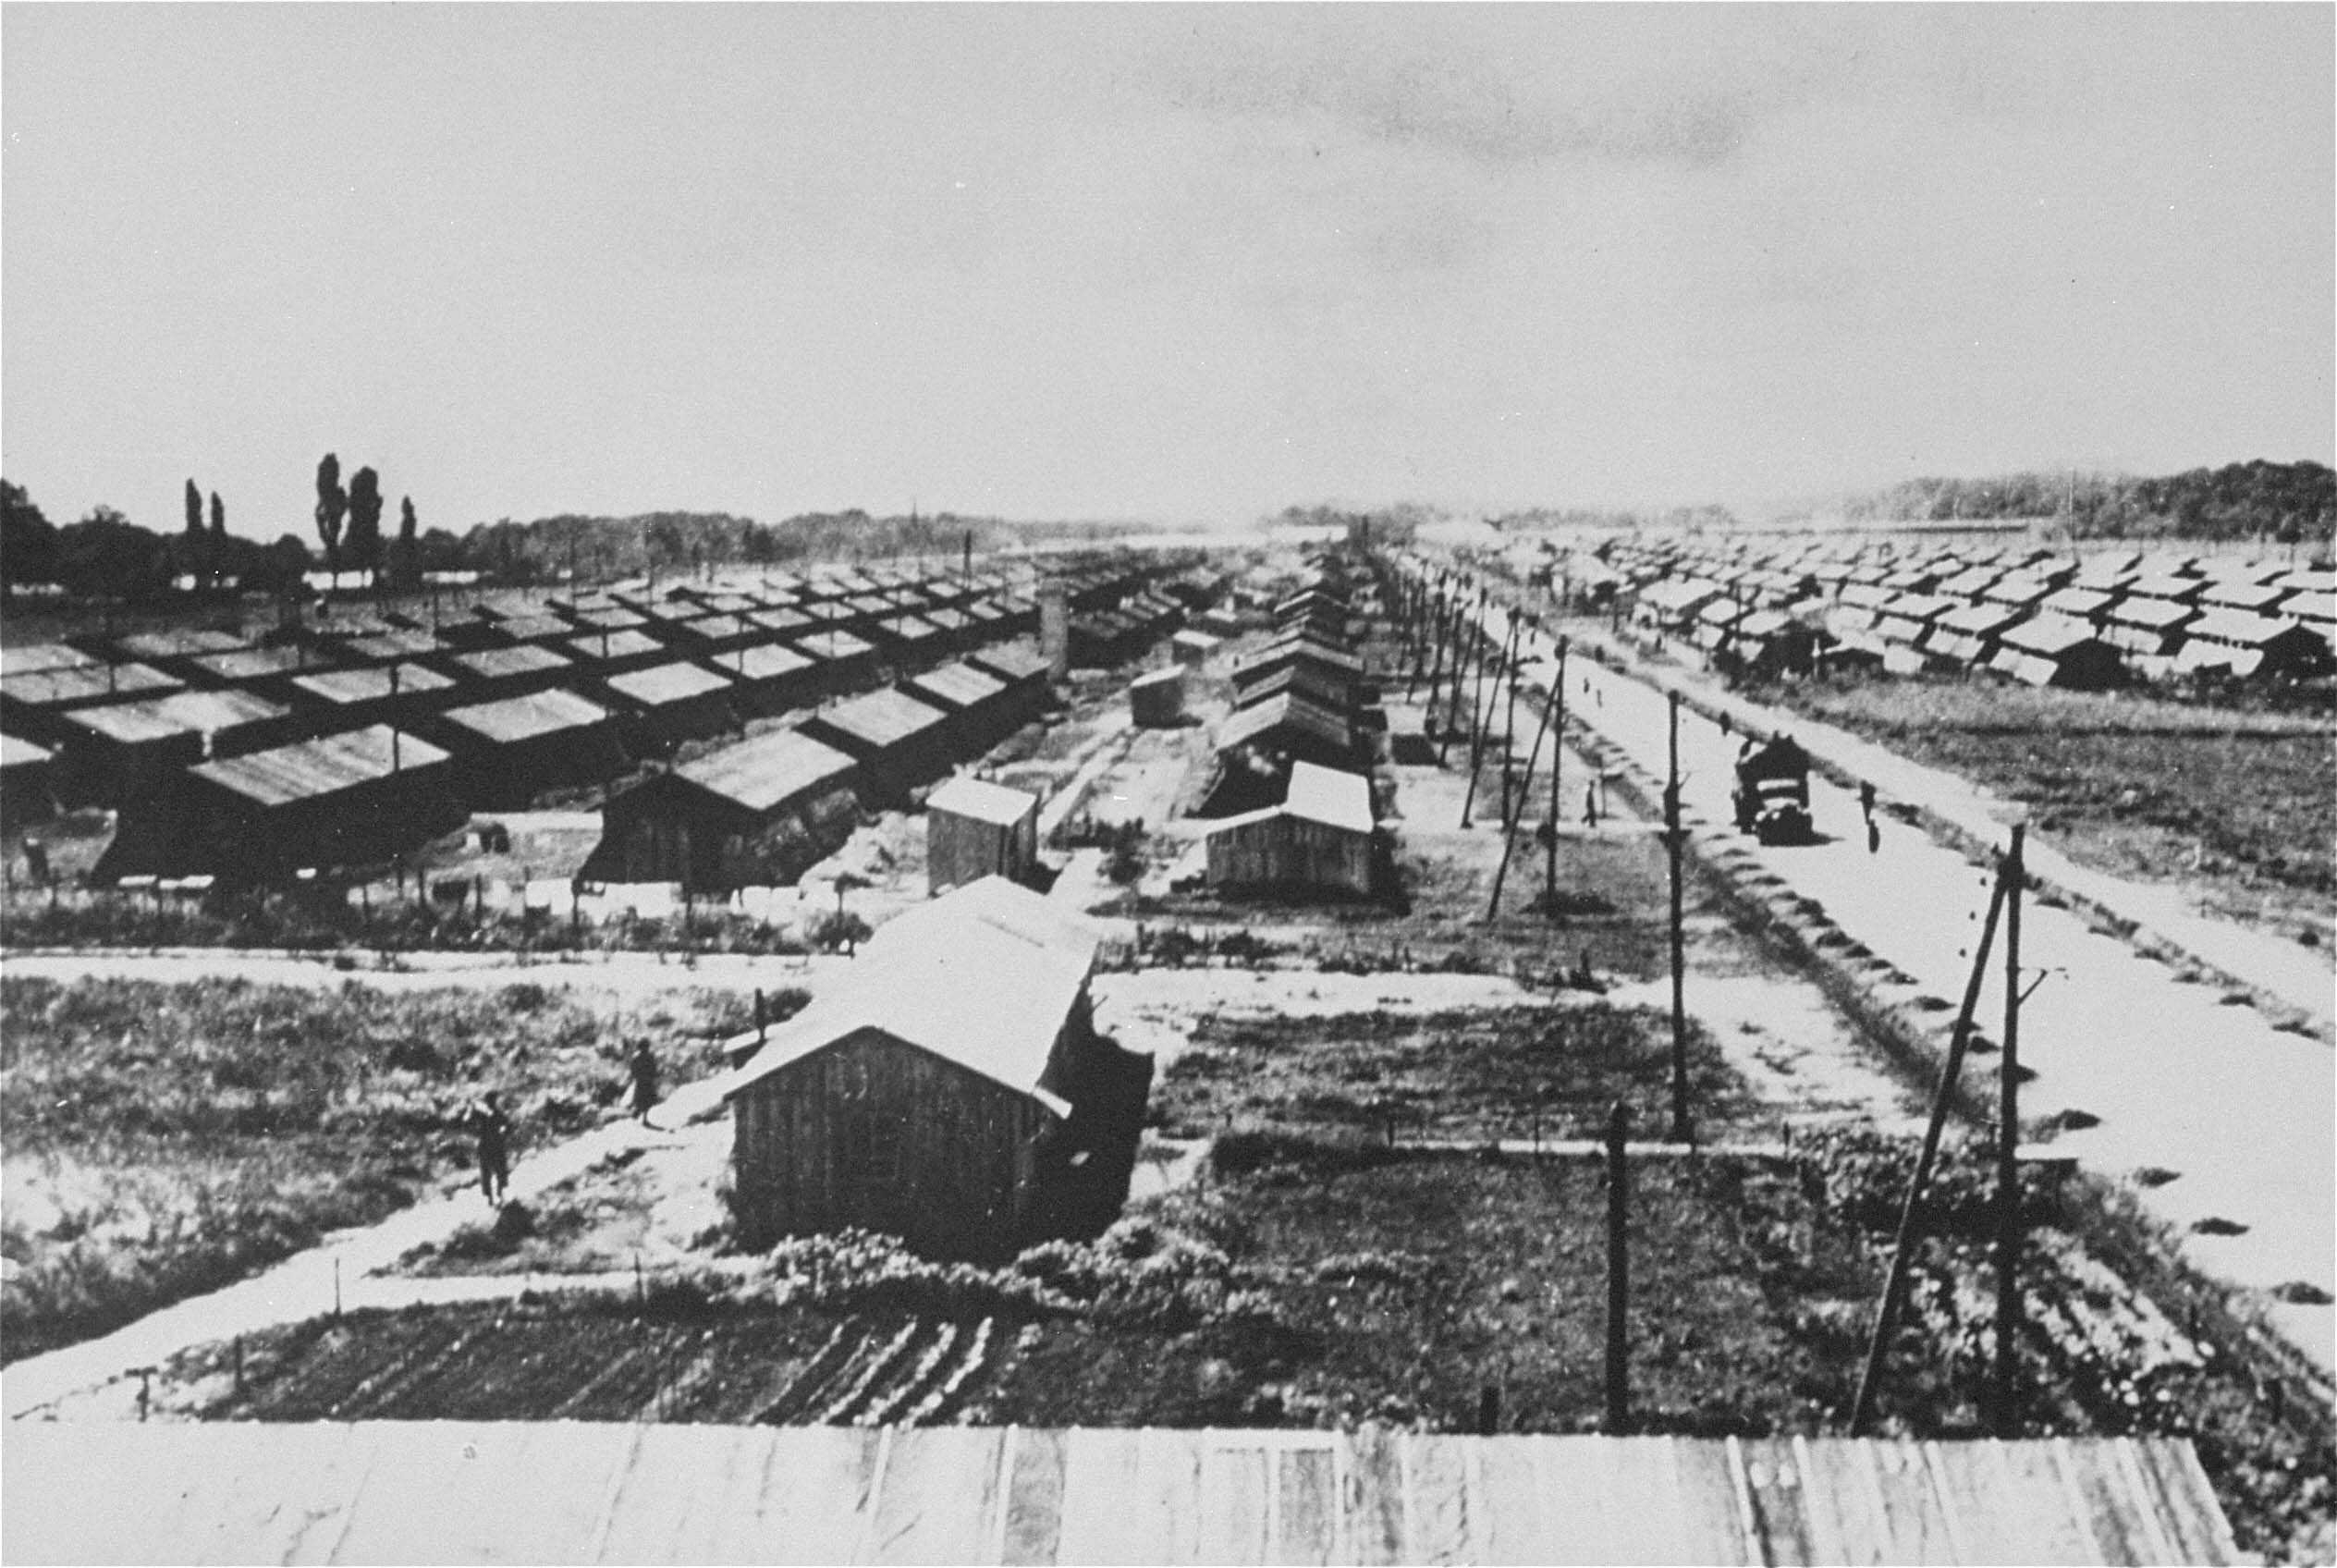 View of the barracks at Gurs Internment Camp